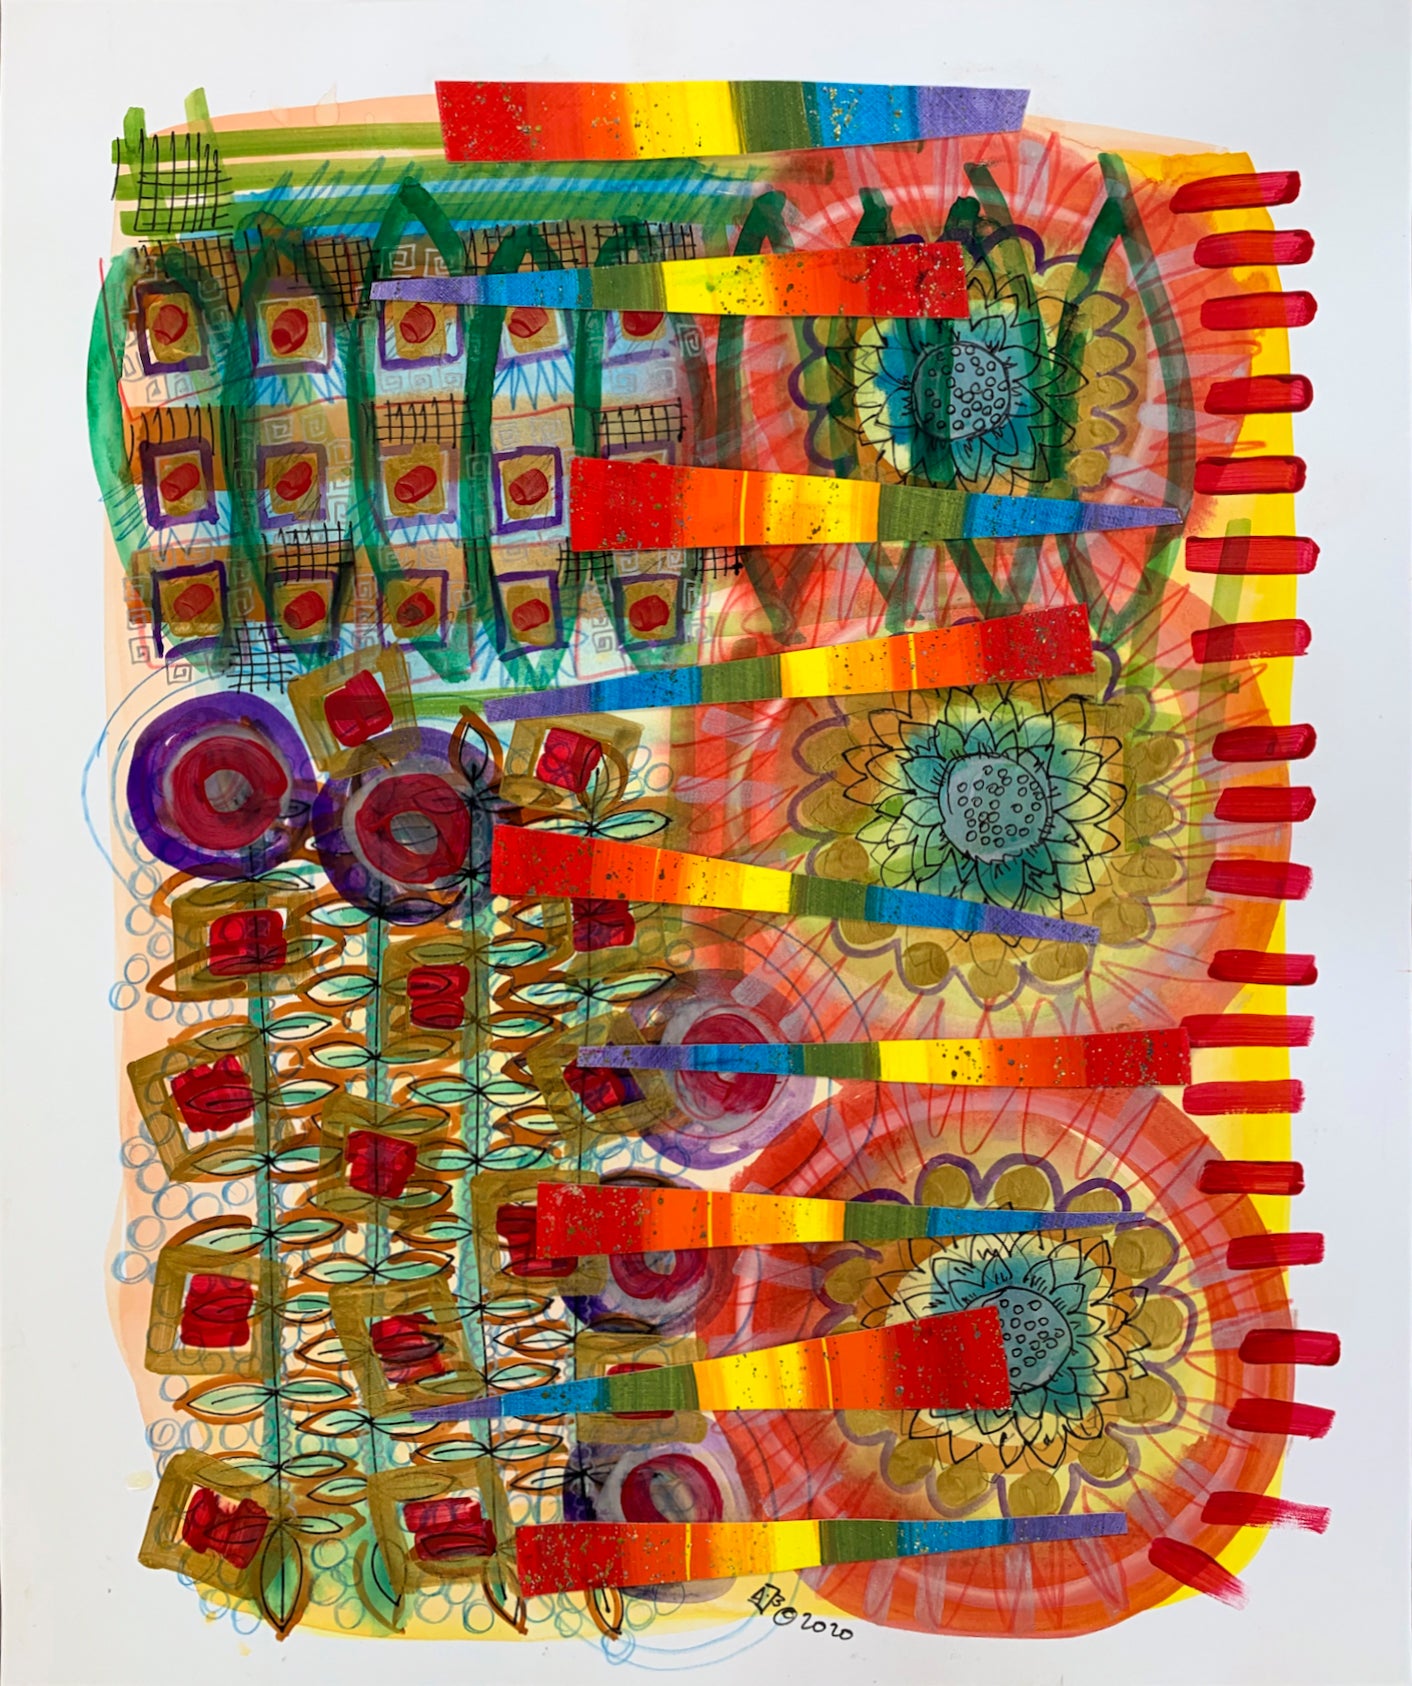 Abstract mixed media colorful image by Jenifer Hernandez - use of paint, markers, added bits of paper title 'Rainbow'